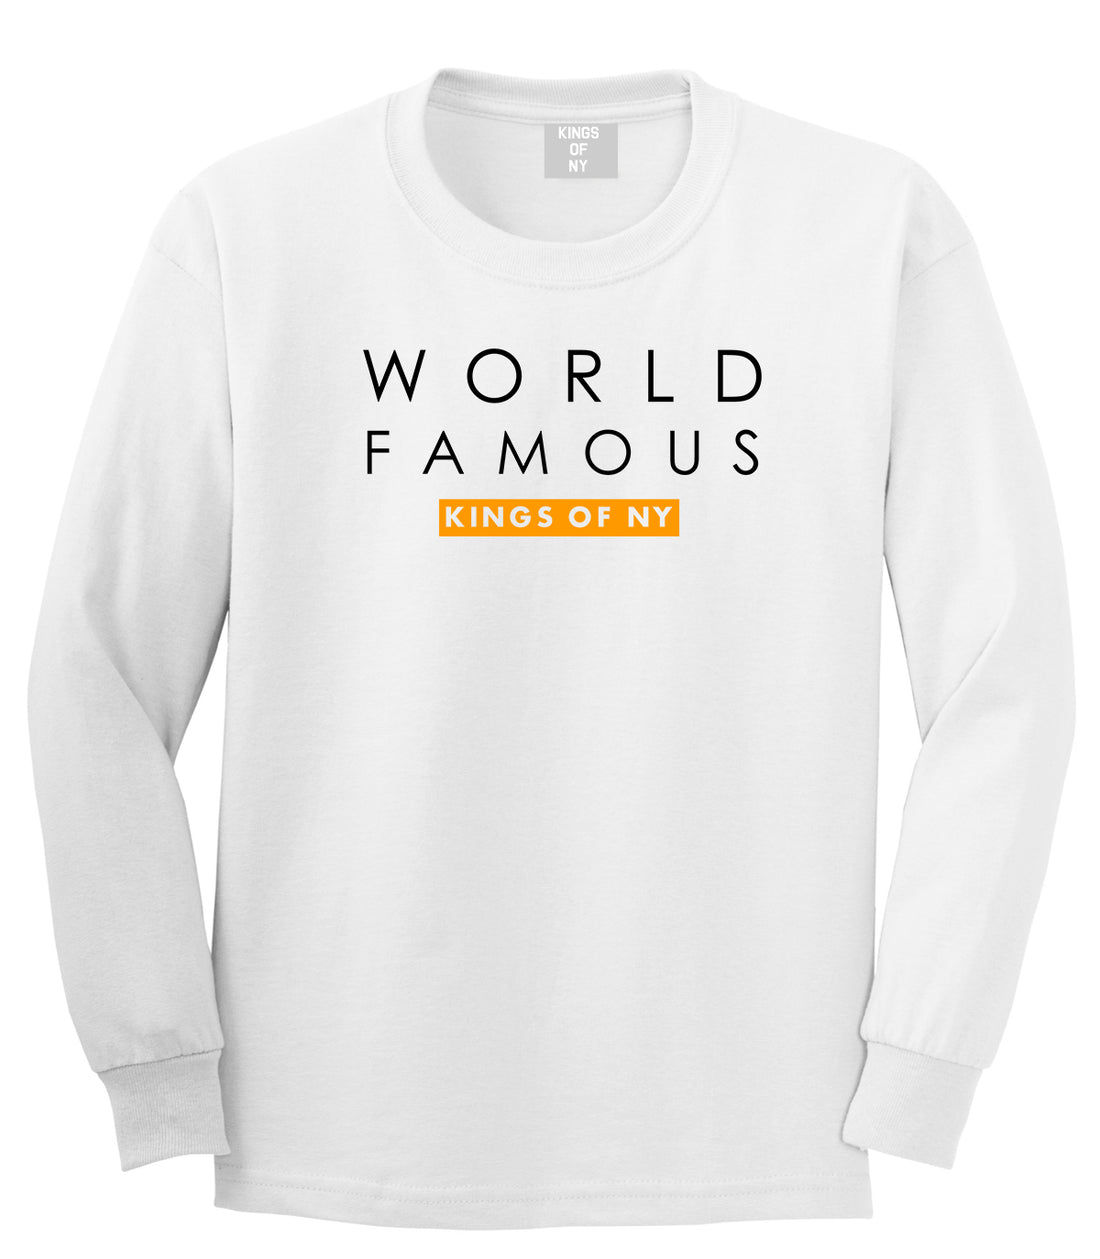 World Famous Long Sleeve T-Shirt in White